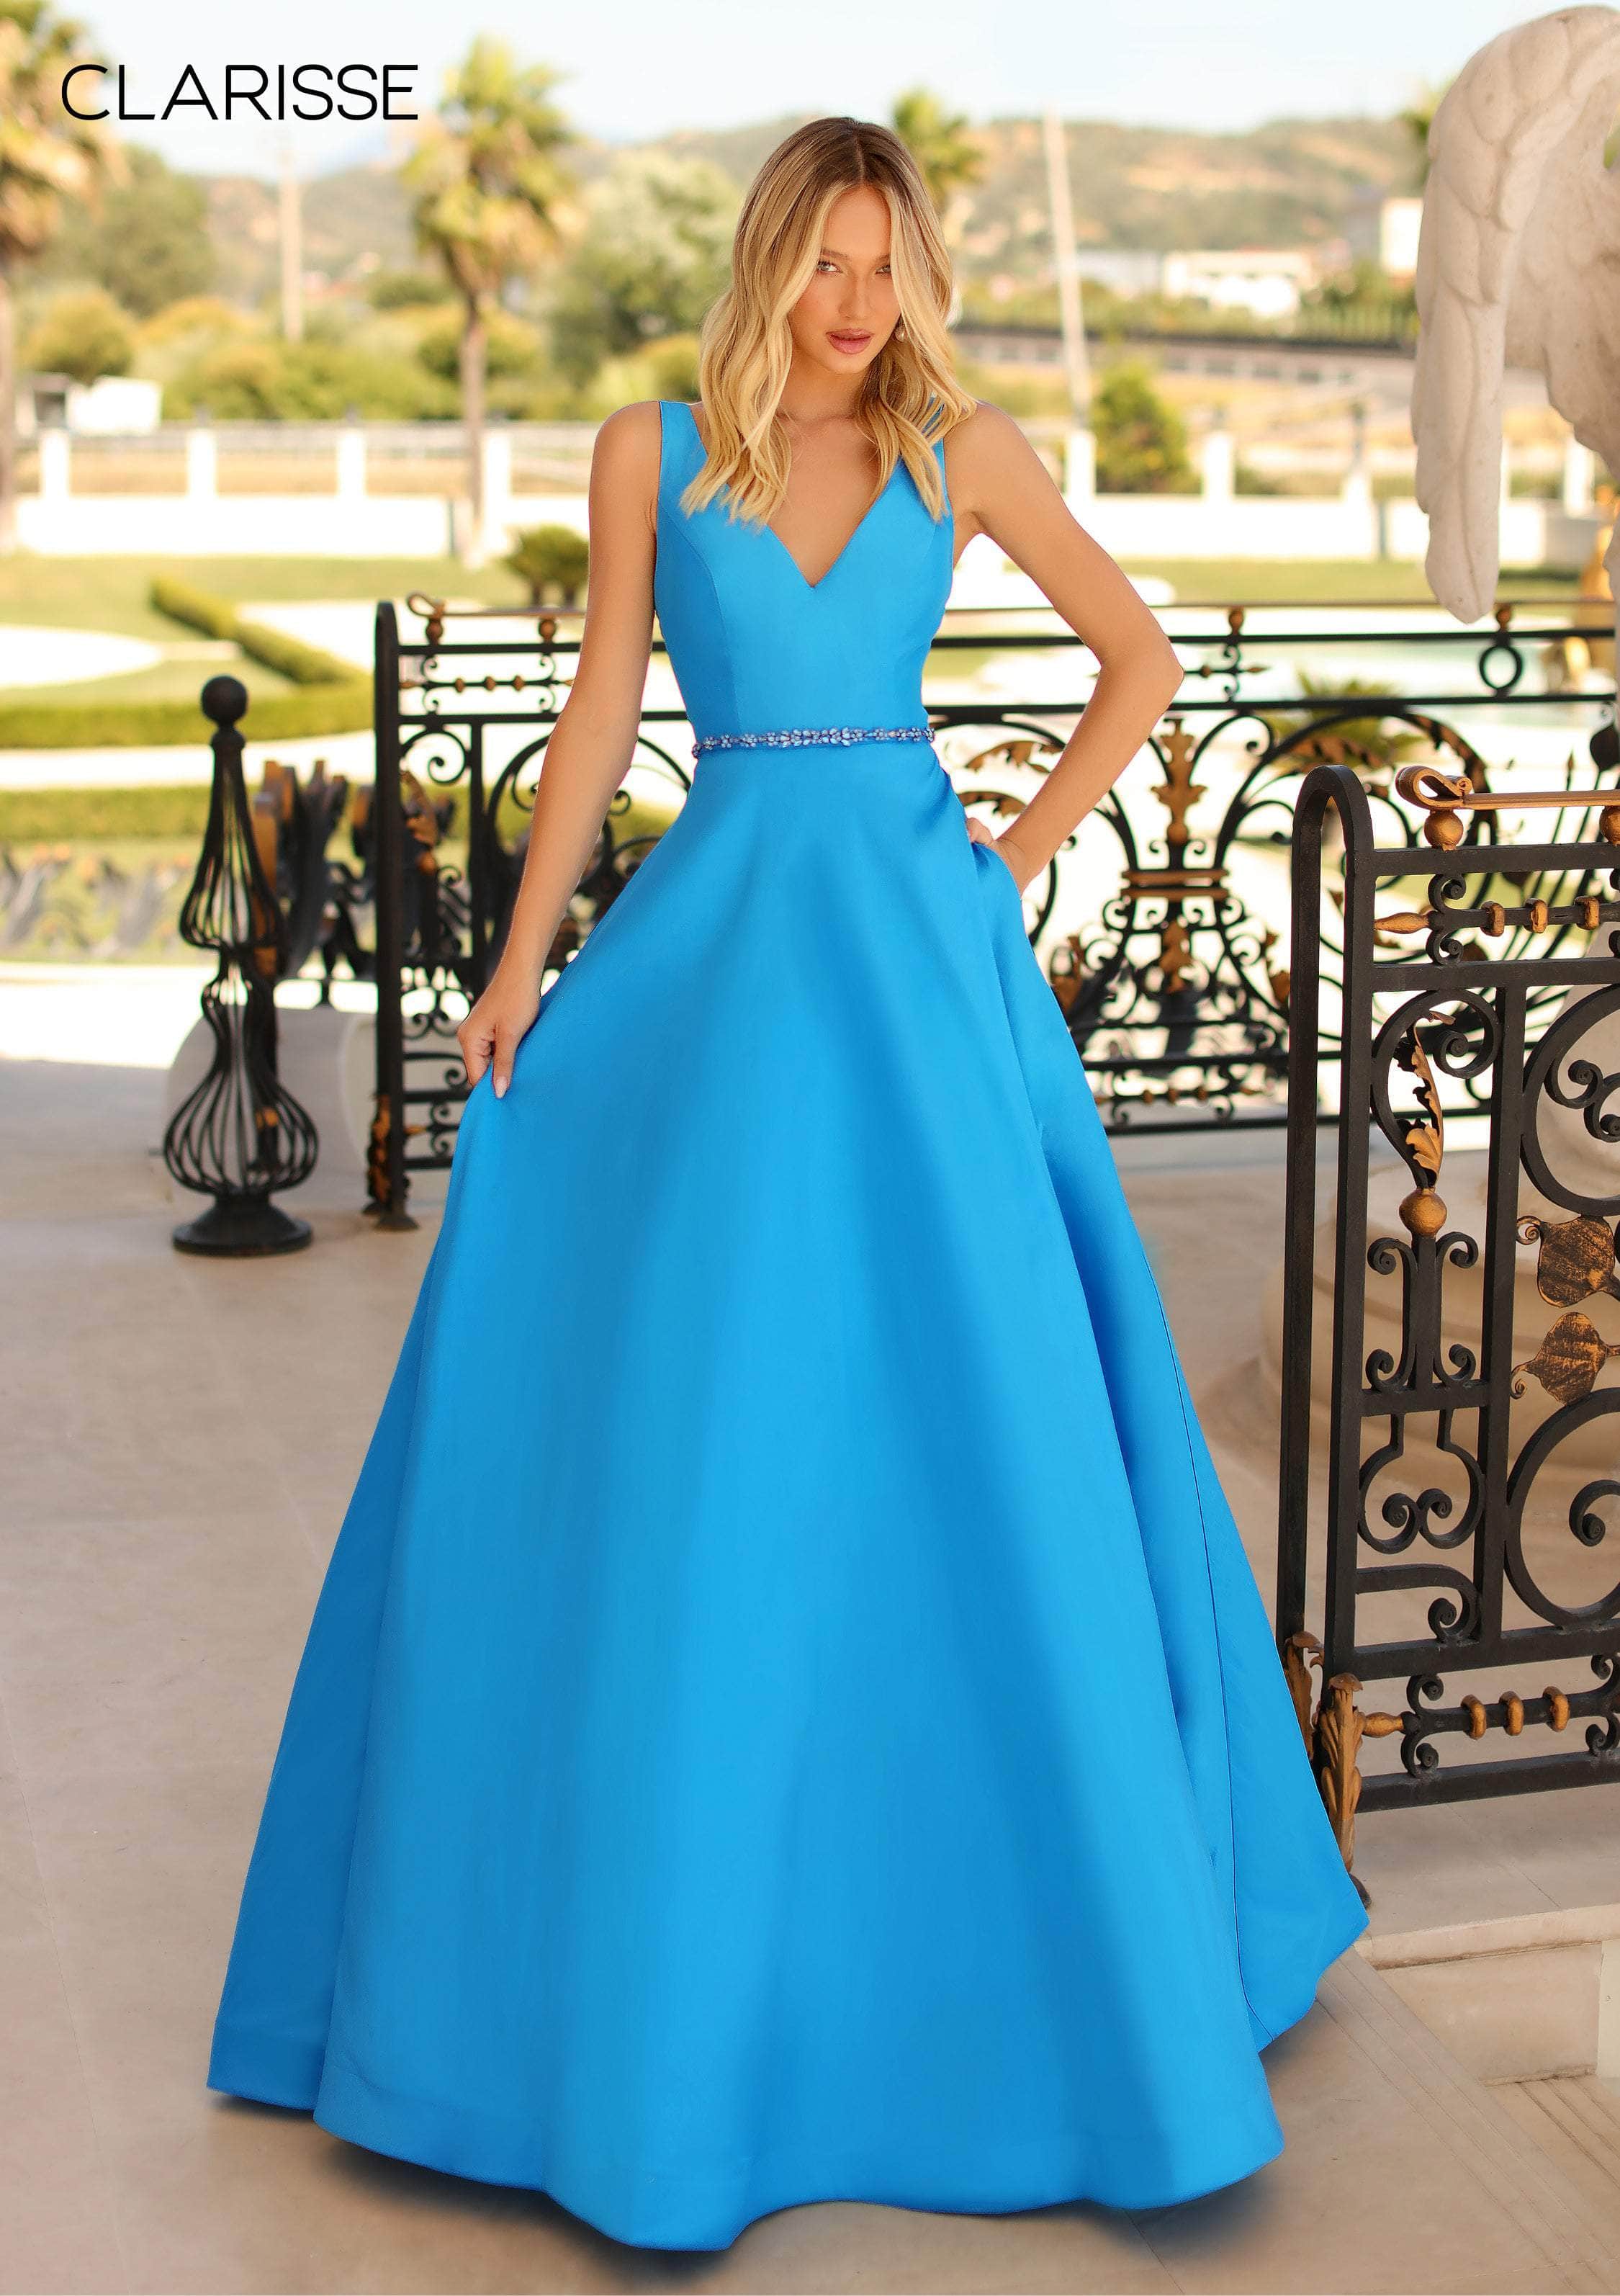 Clarisse - 8194 Sleeveless V Neck A-Line Gown with Beaded Belt ...